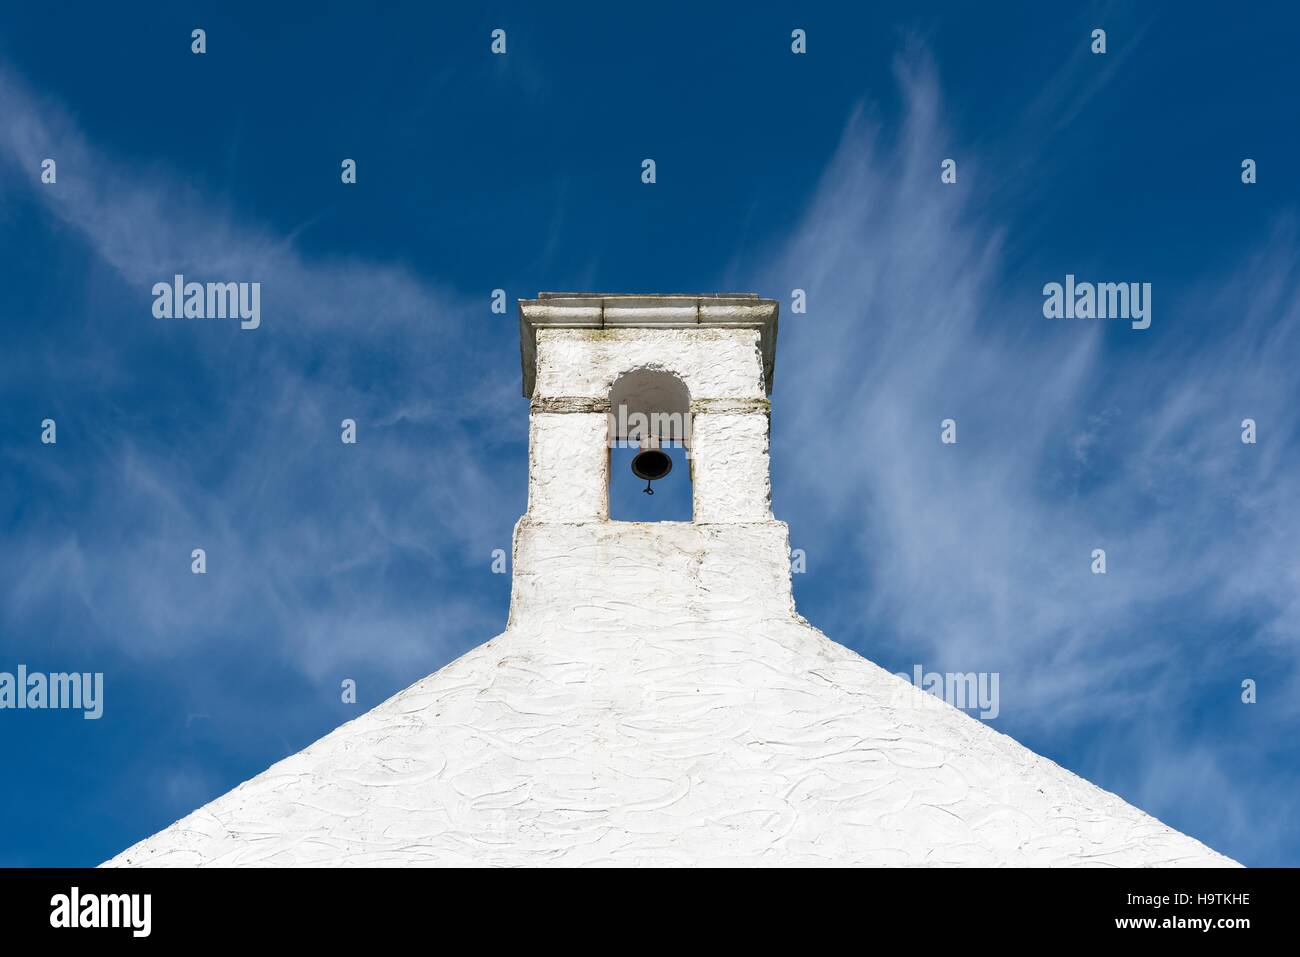 Gable with bell of an old school house, Isle of Islay, Inner Hebrides, Scotland, United Kingdom Stock Photo